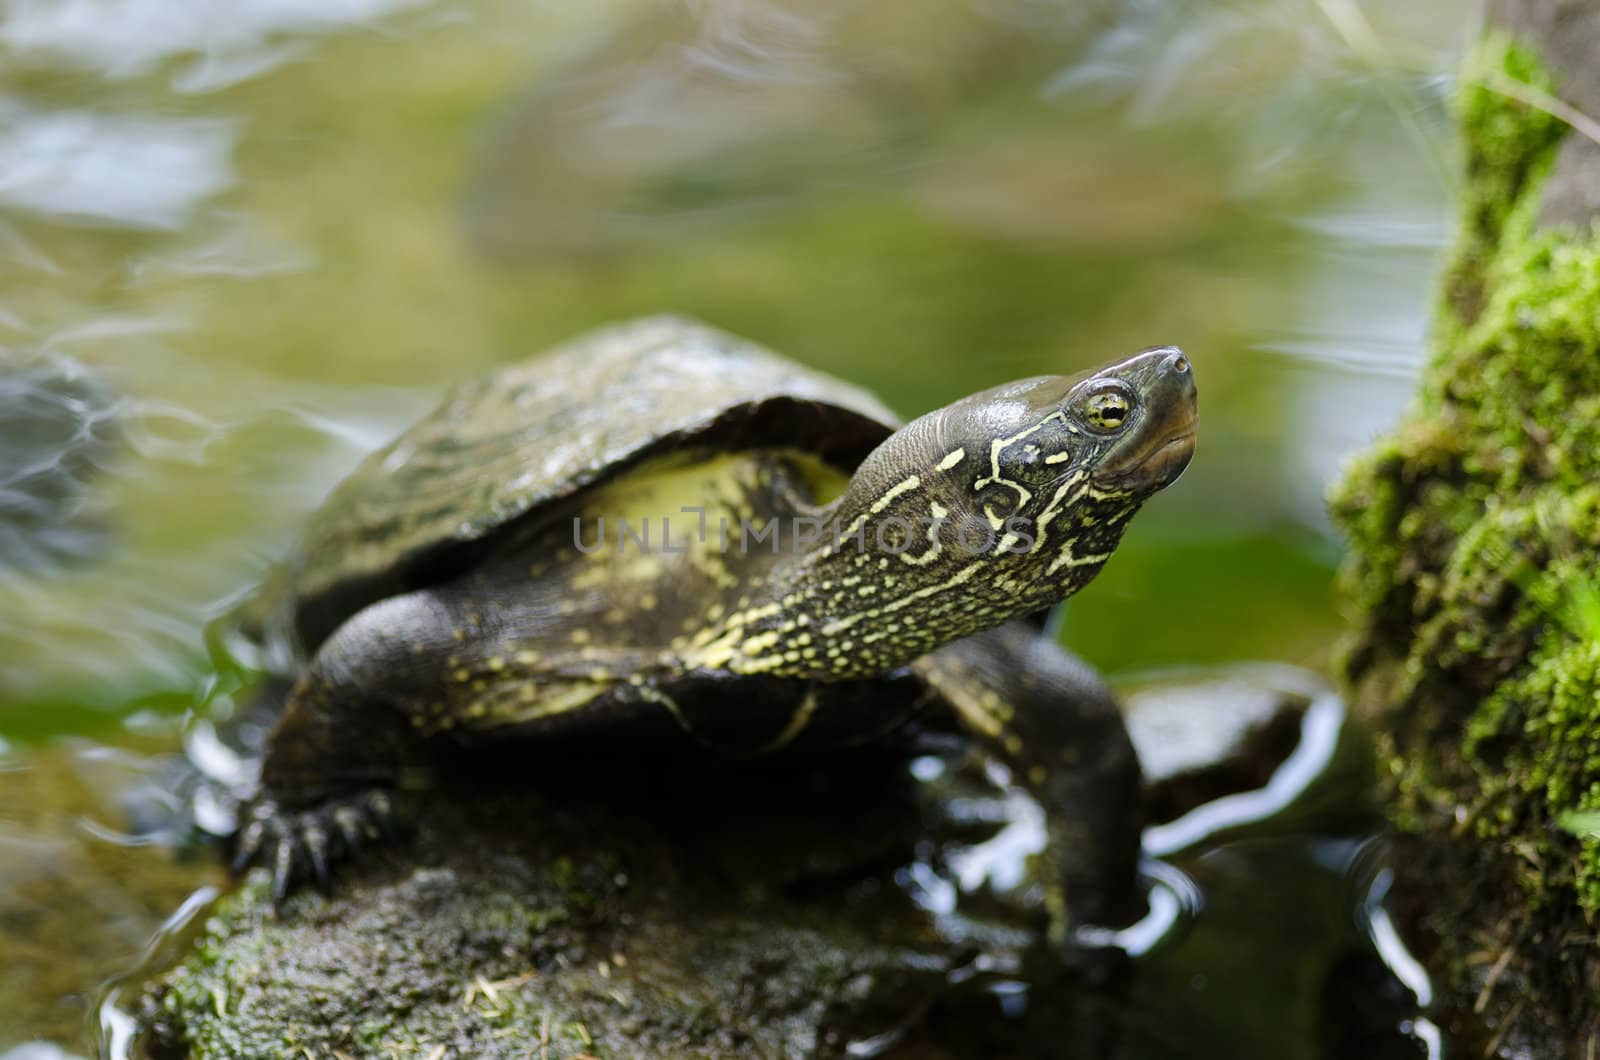 Chinese pond turtle sitting on a stone in water, Mauremys reevesii, an endangered species